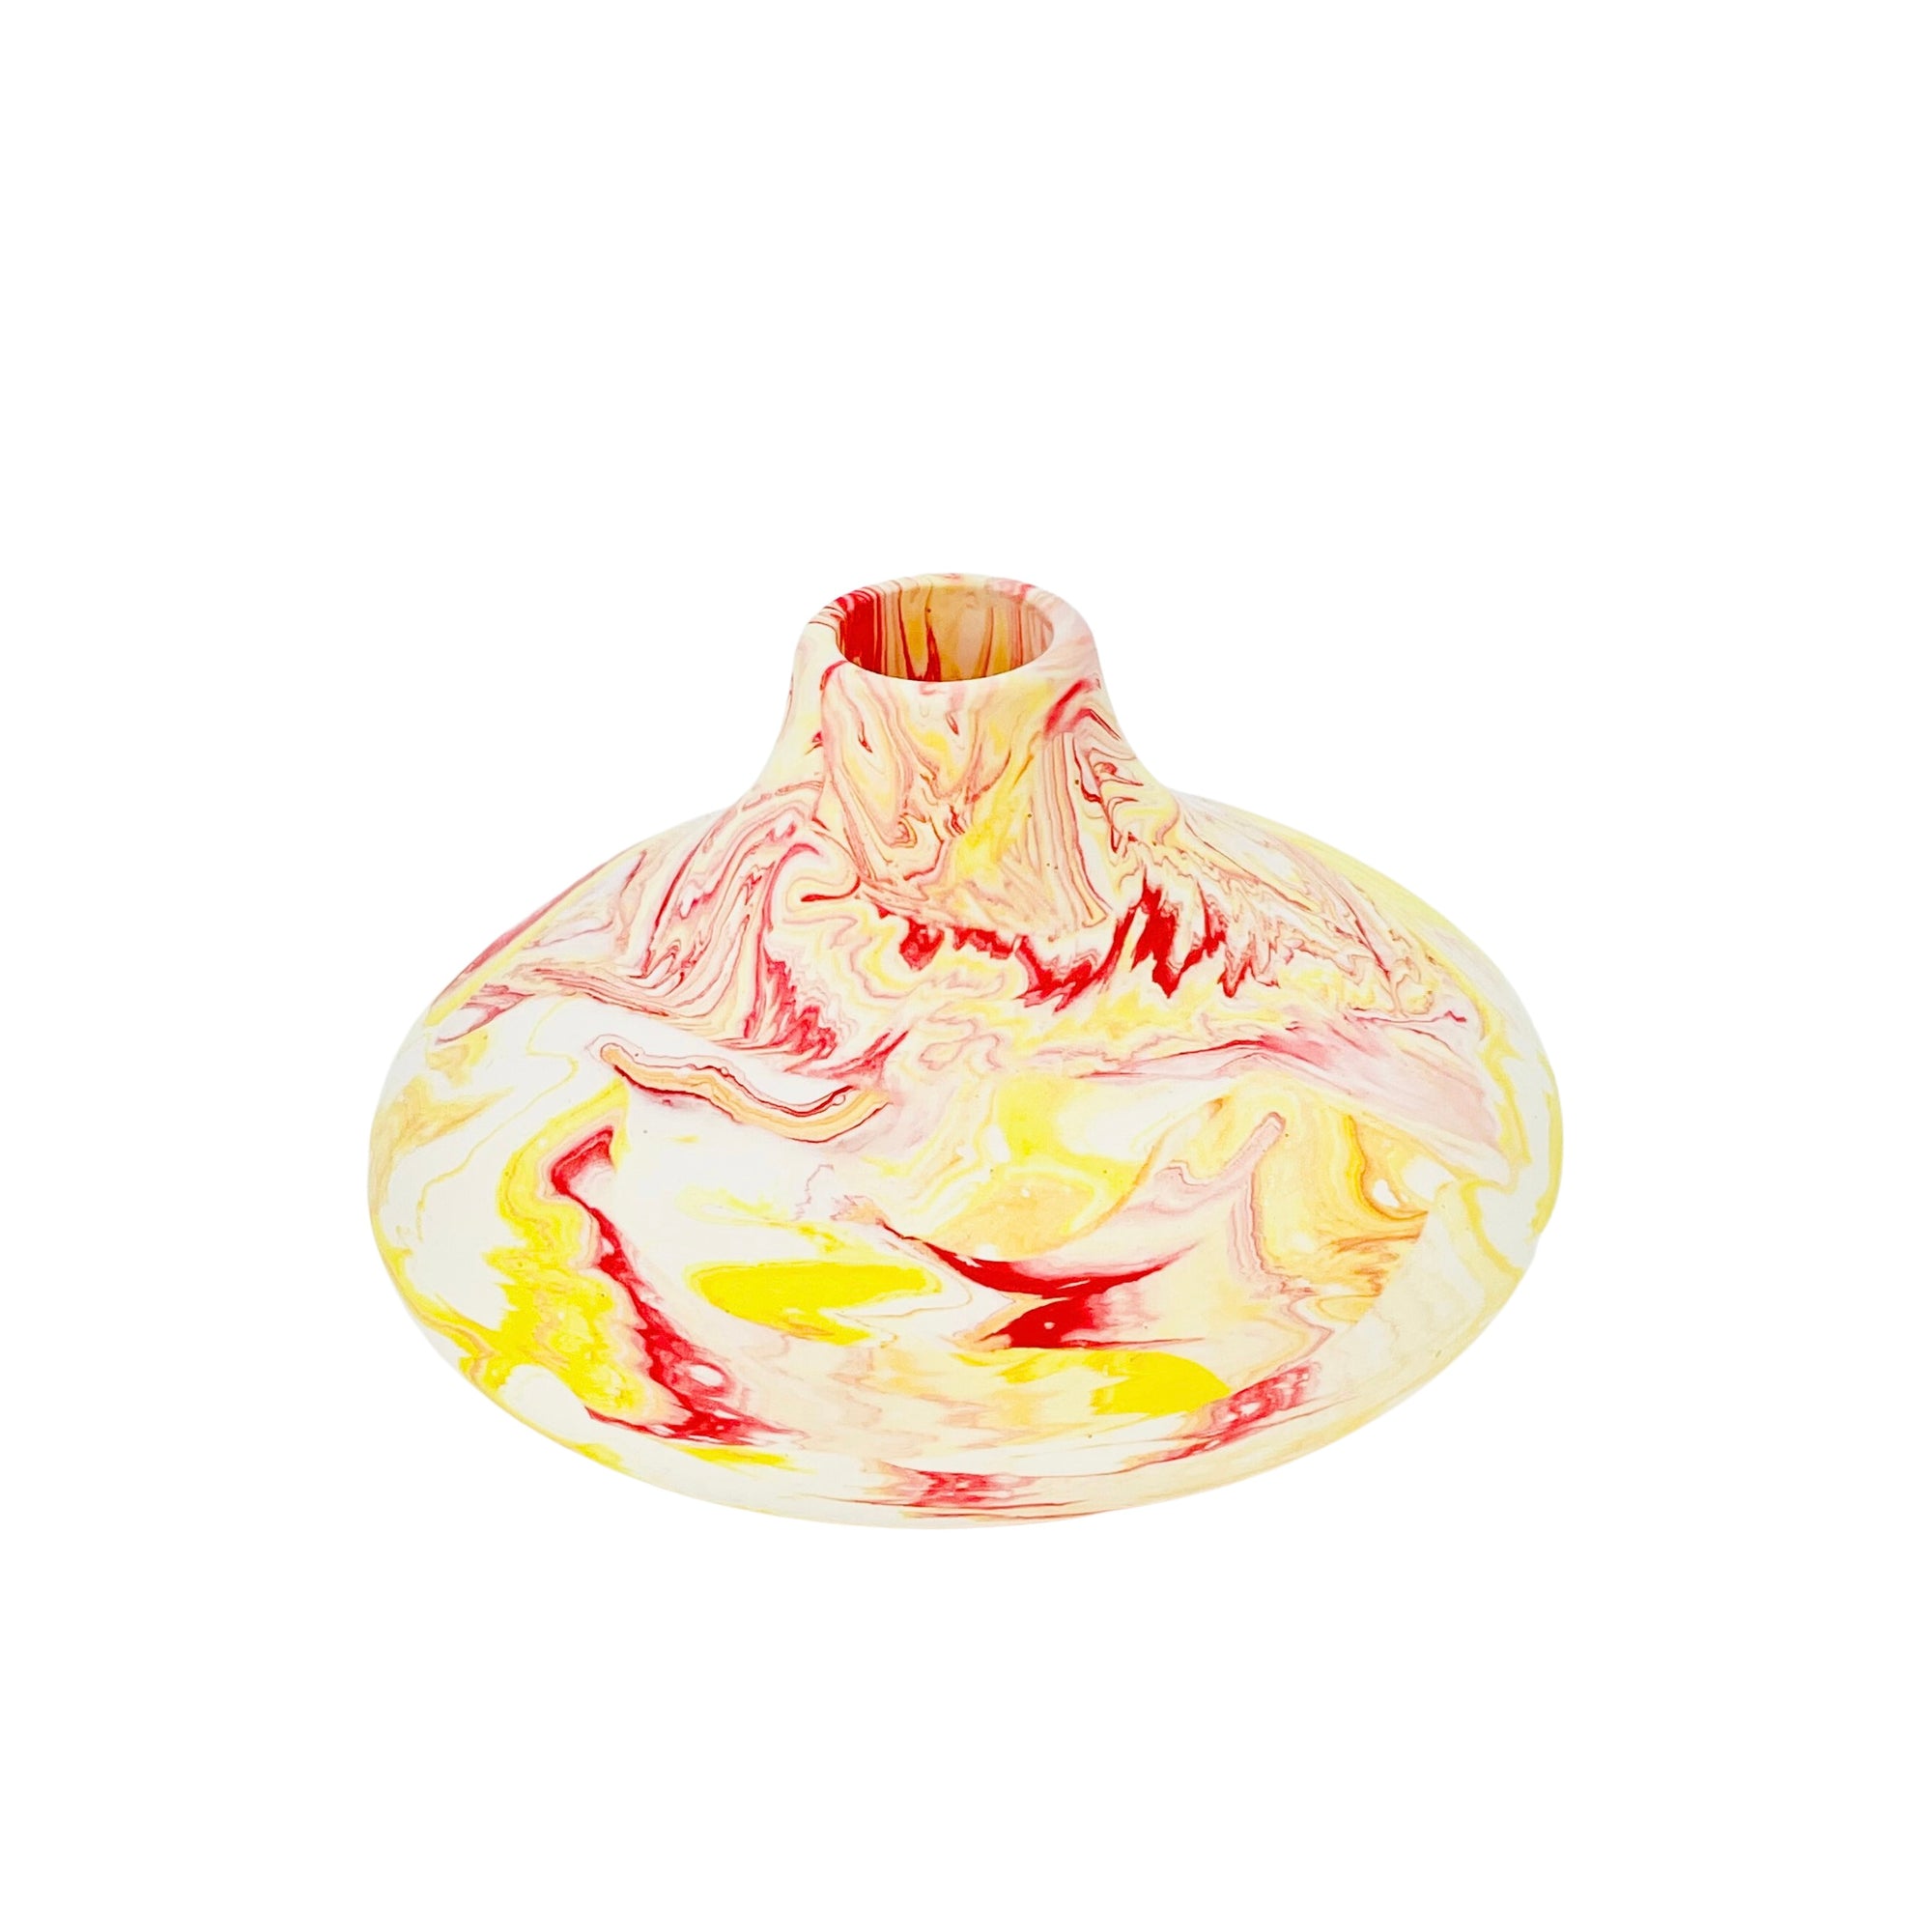 This small bulbous Jesmonite vase is marbled with red and yellow pigment.